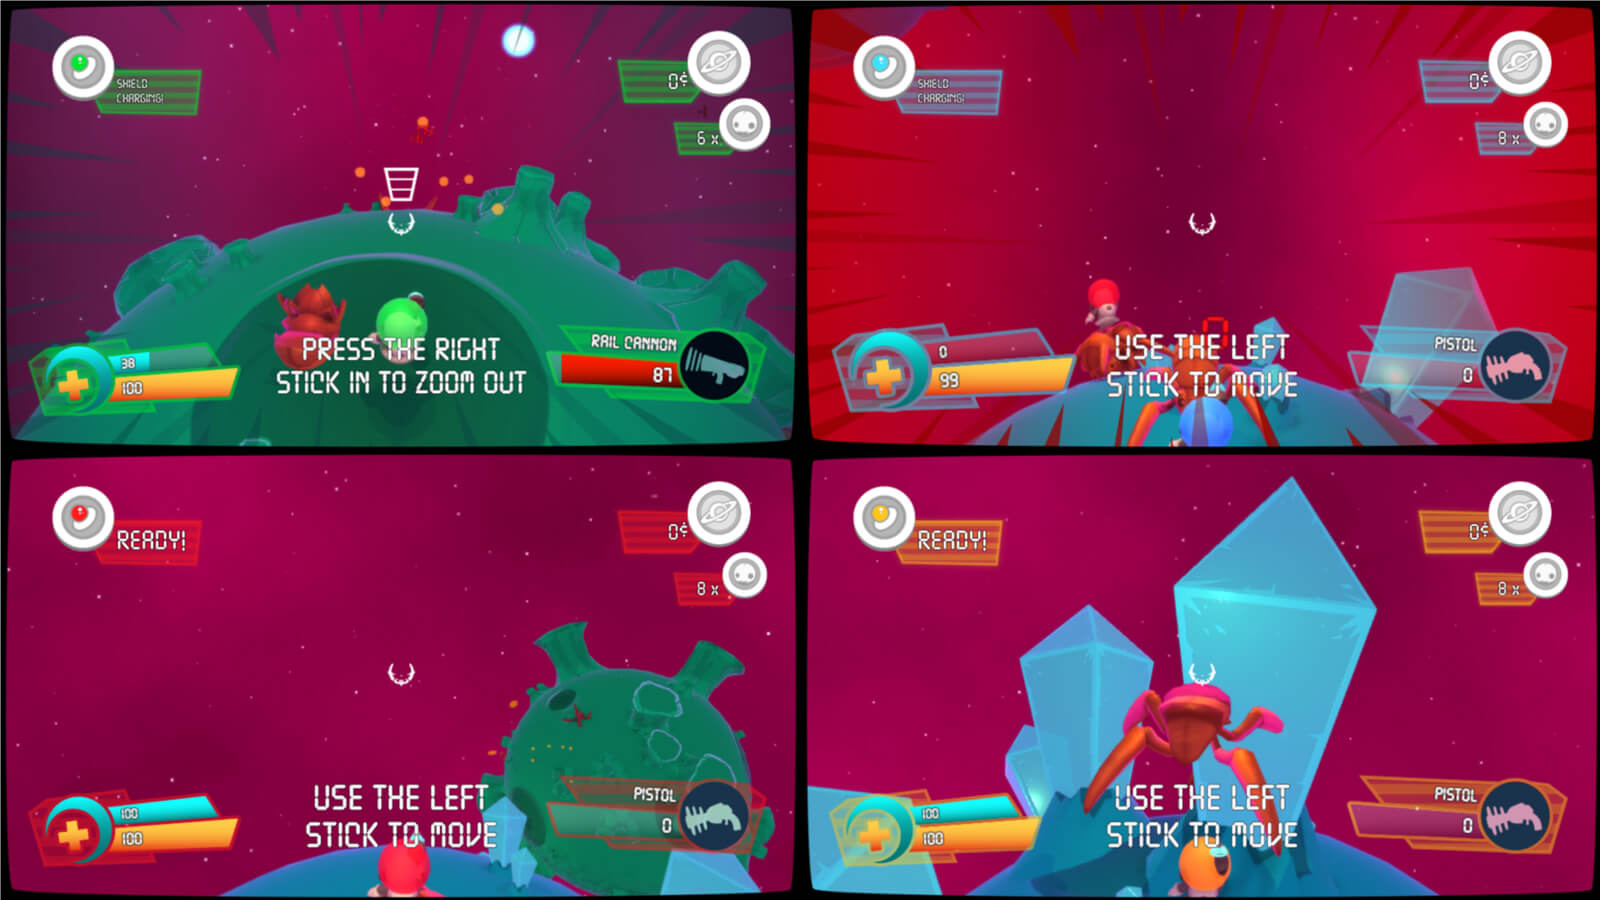 Four players compete in splitscreen multiplayer mode.